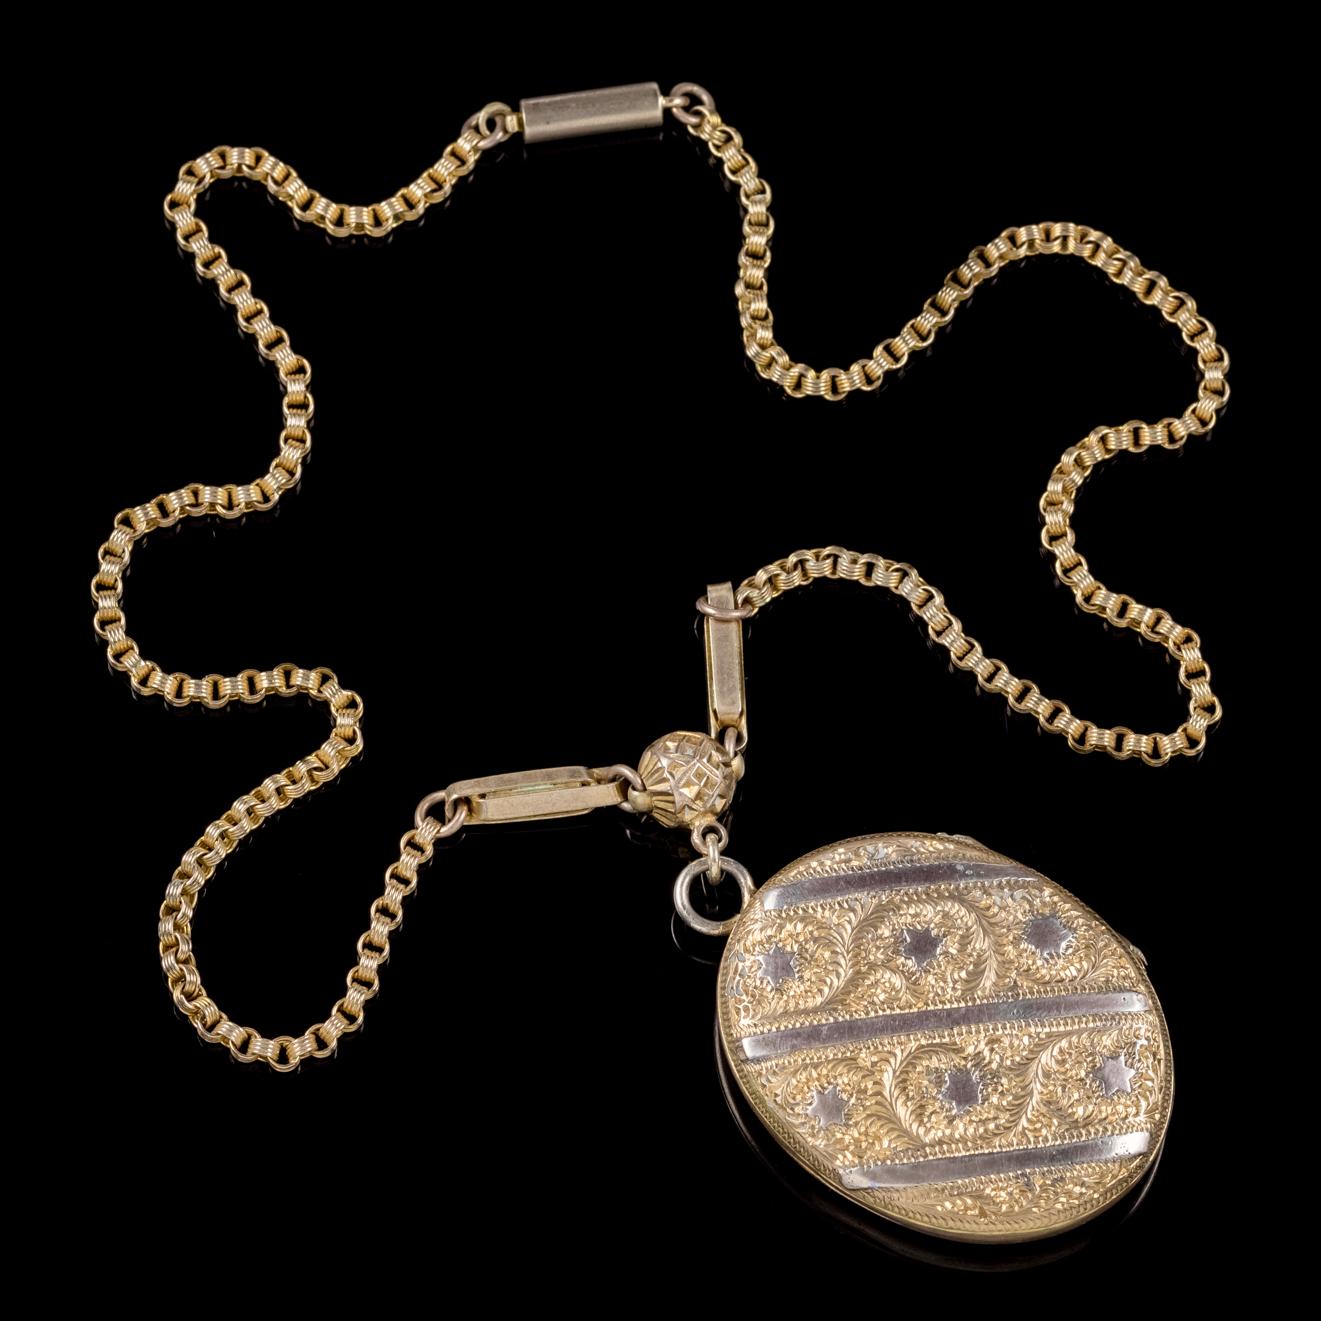 Antique Victorian Gold-Plated Locket Chain Necklace, circa 1900 For Sale 1